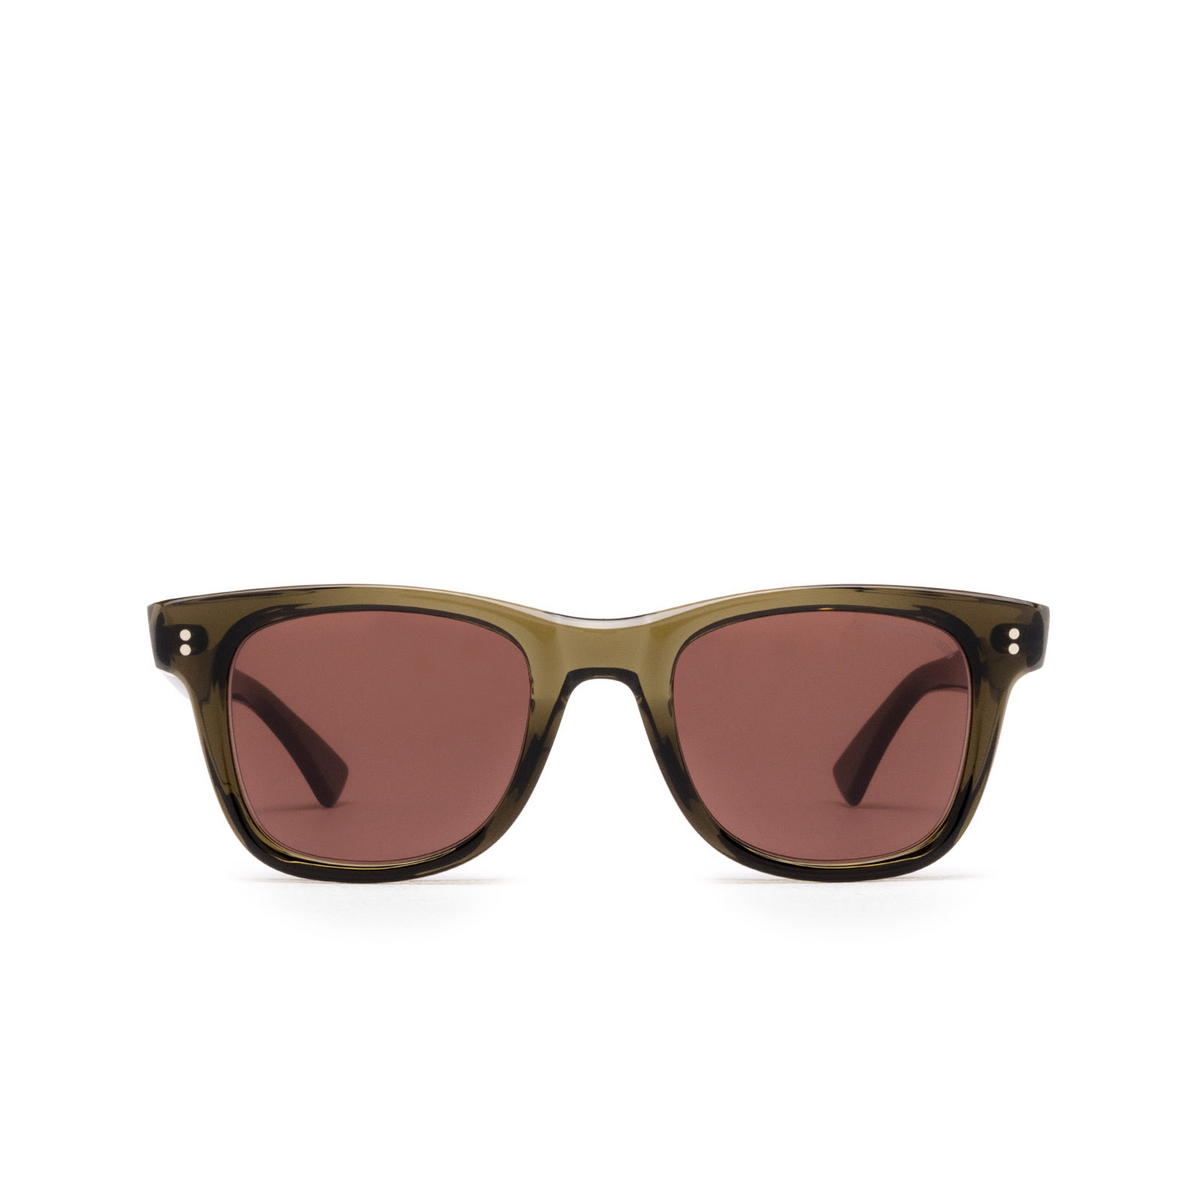 Cutler and Gross 9101 Sunglasses 03 Olive - front view